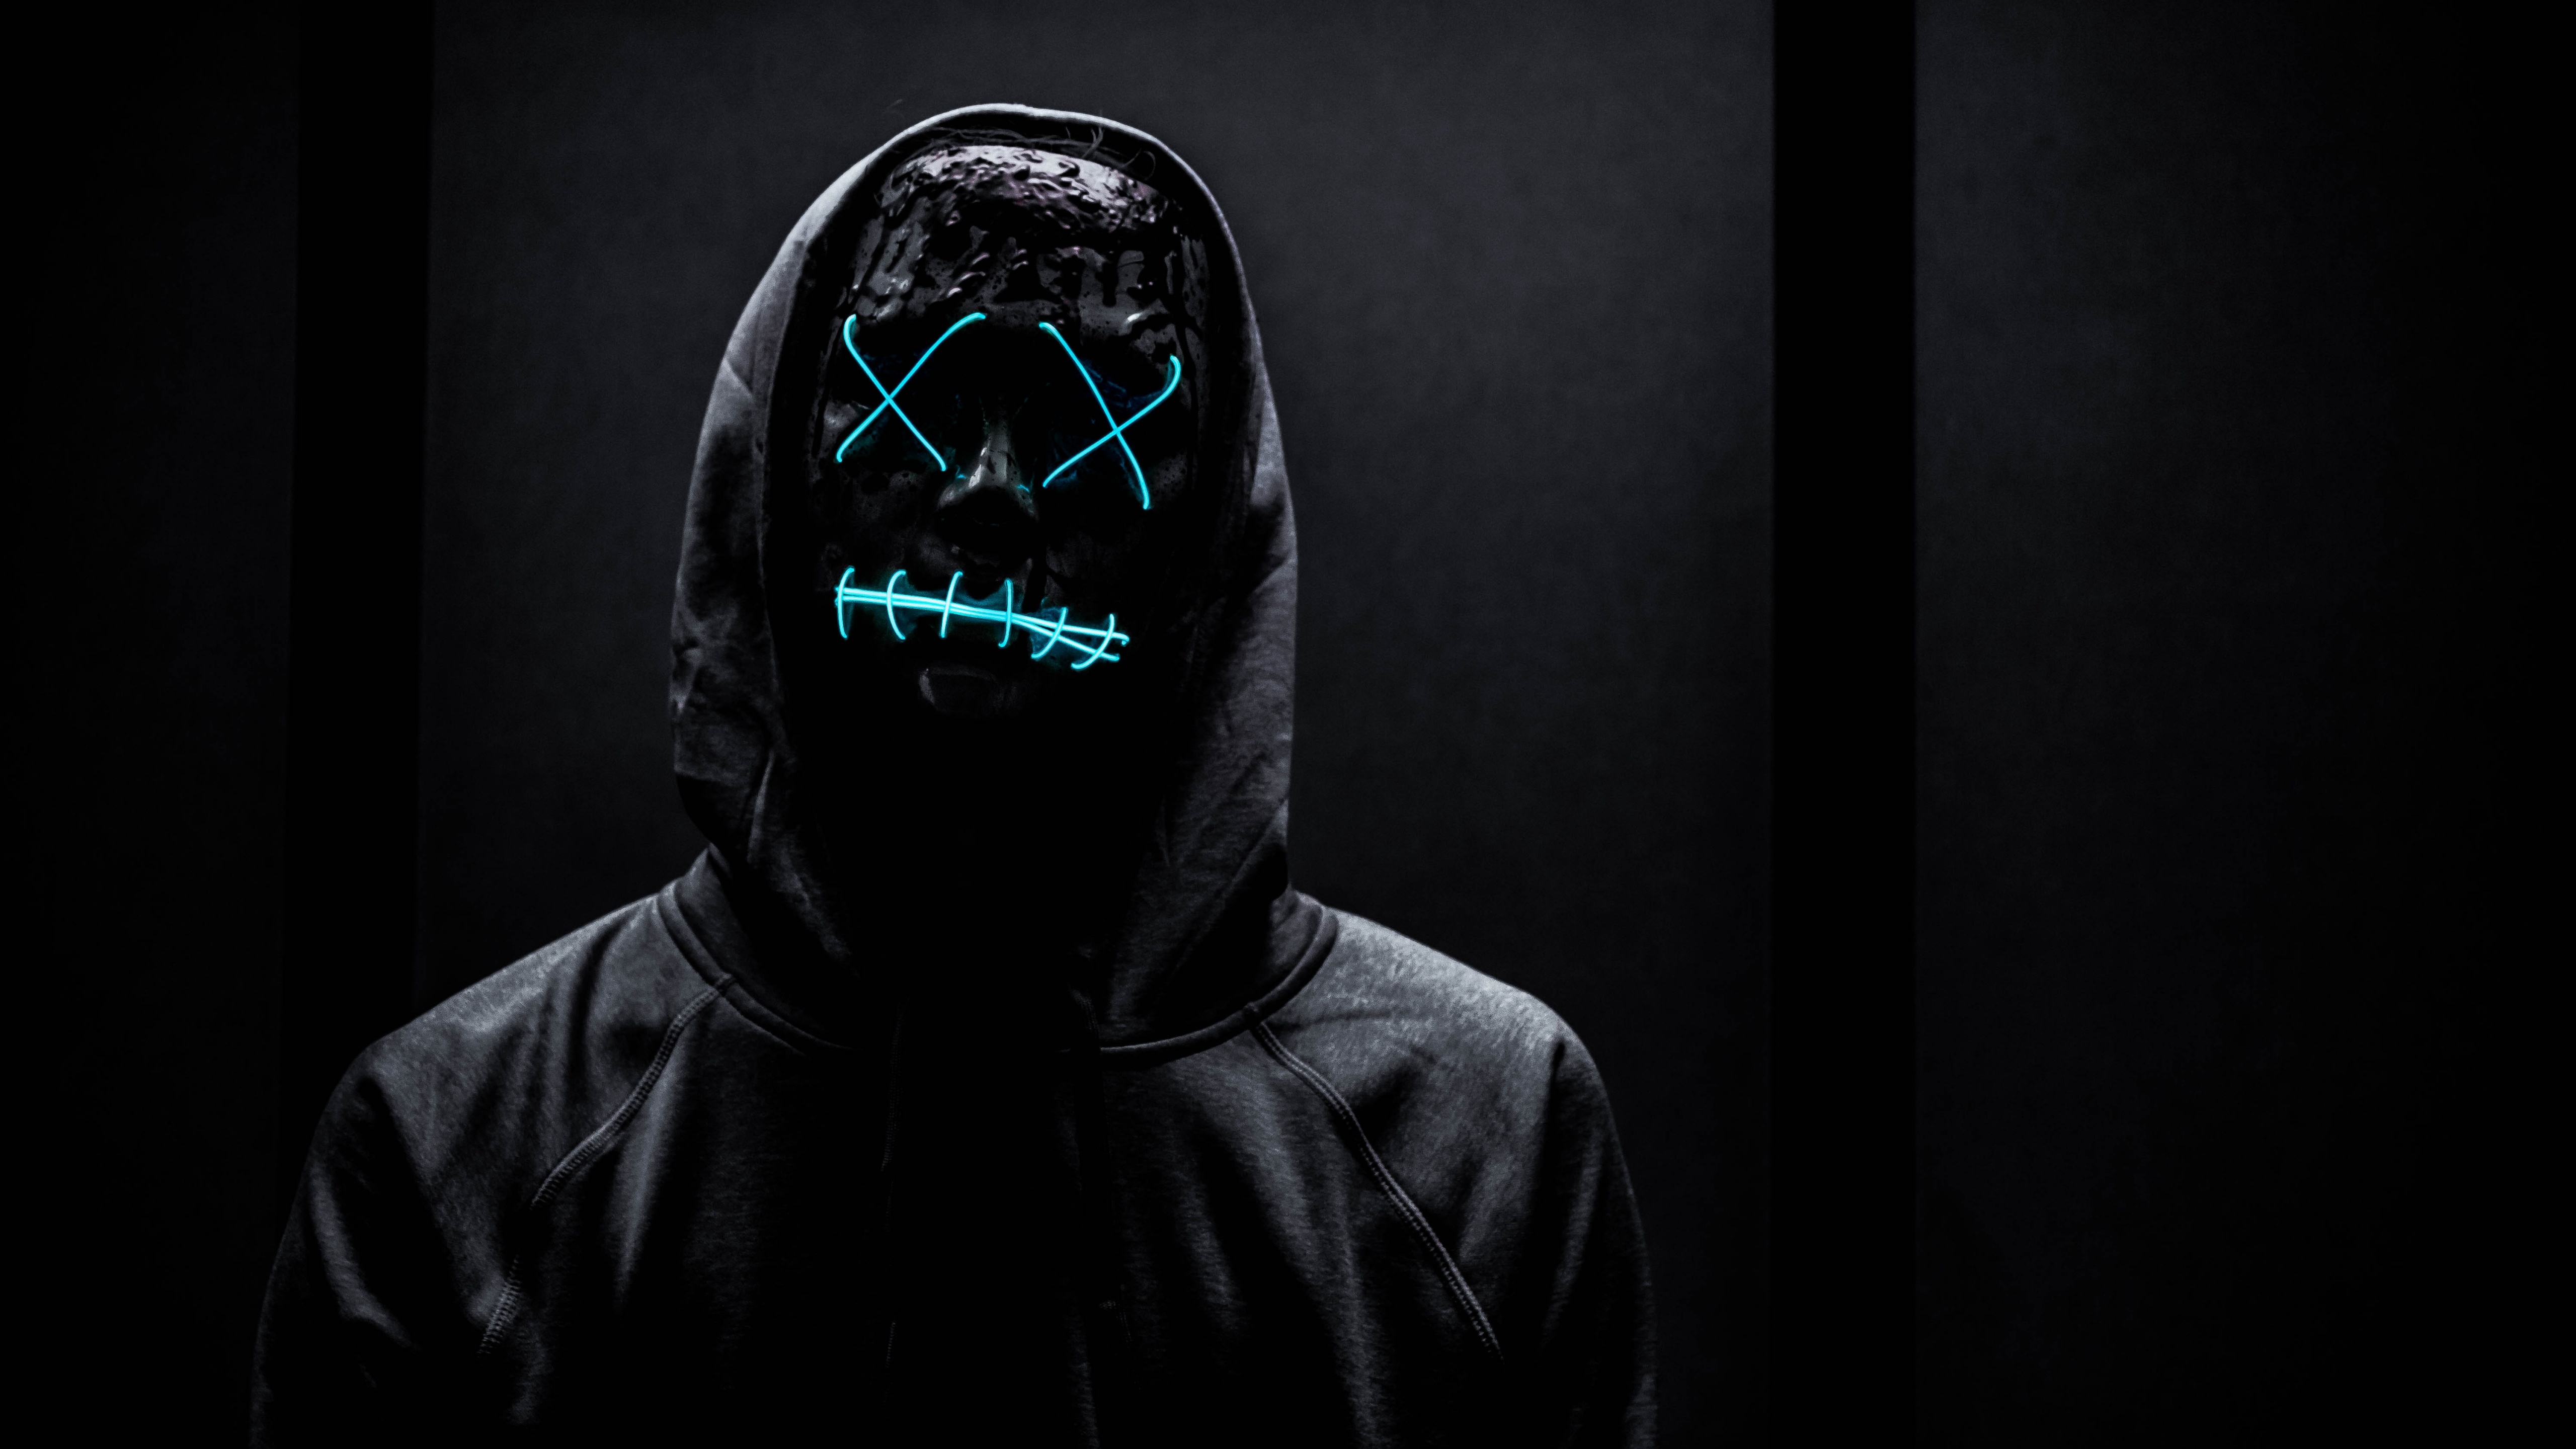 The Hoodie Neon Mask iPhone Wallpaper HD - iPhone Wallpapers